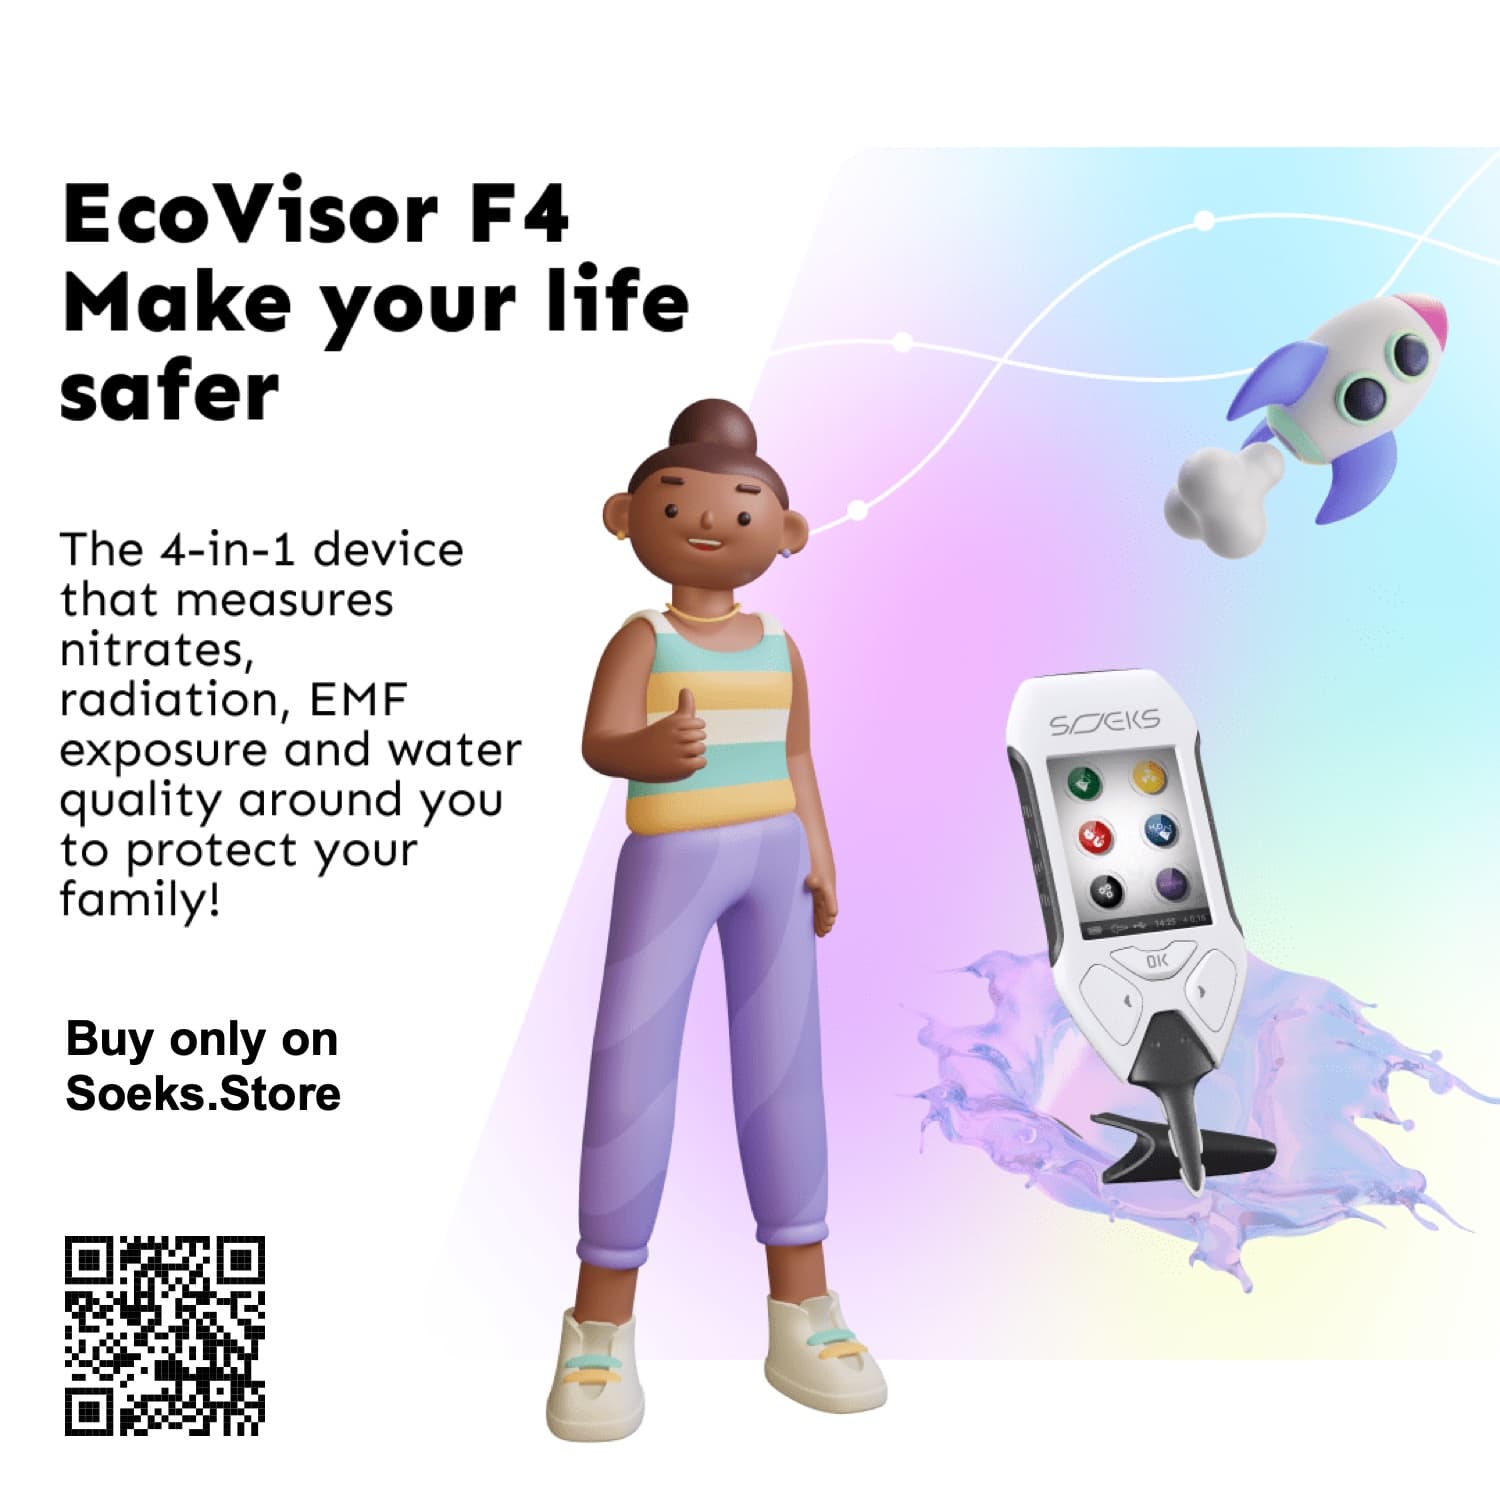 EcoVisor F4 - Make your life safer, The 4-in-1 device that measures nitrates, radiation, EMF exposure and water quality around you to protect your family!